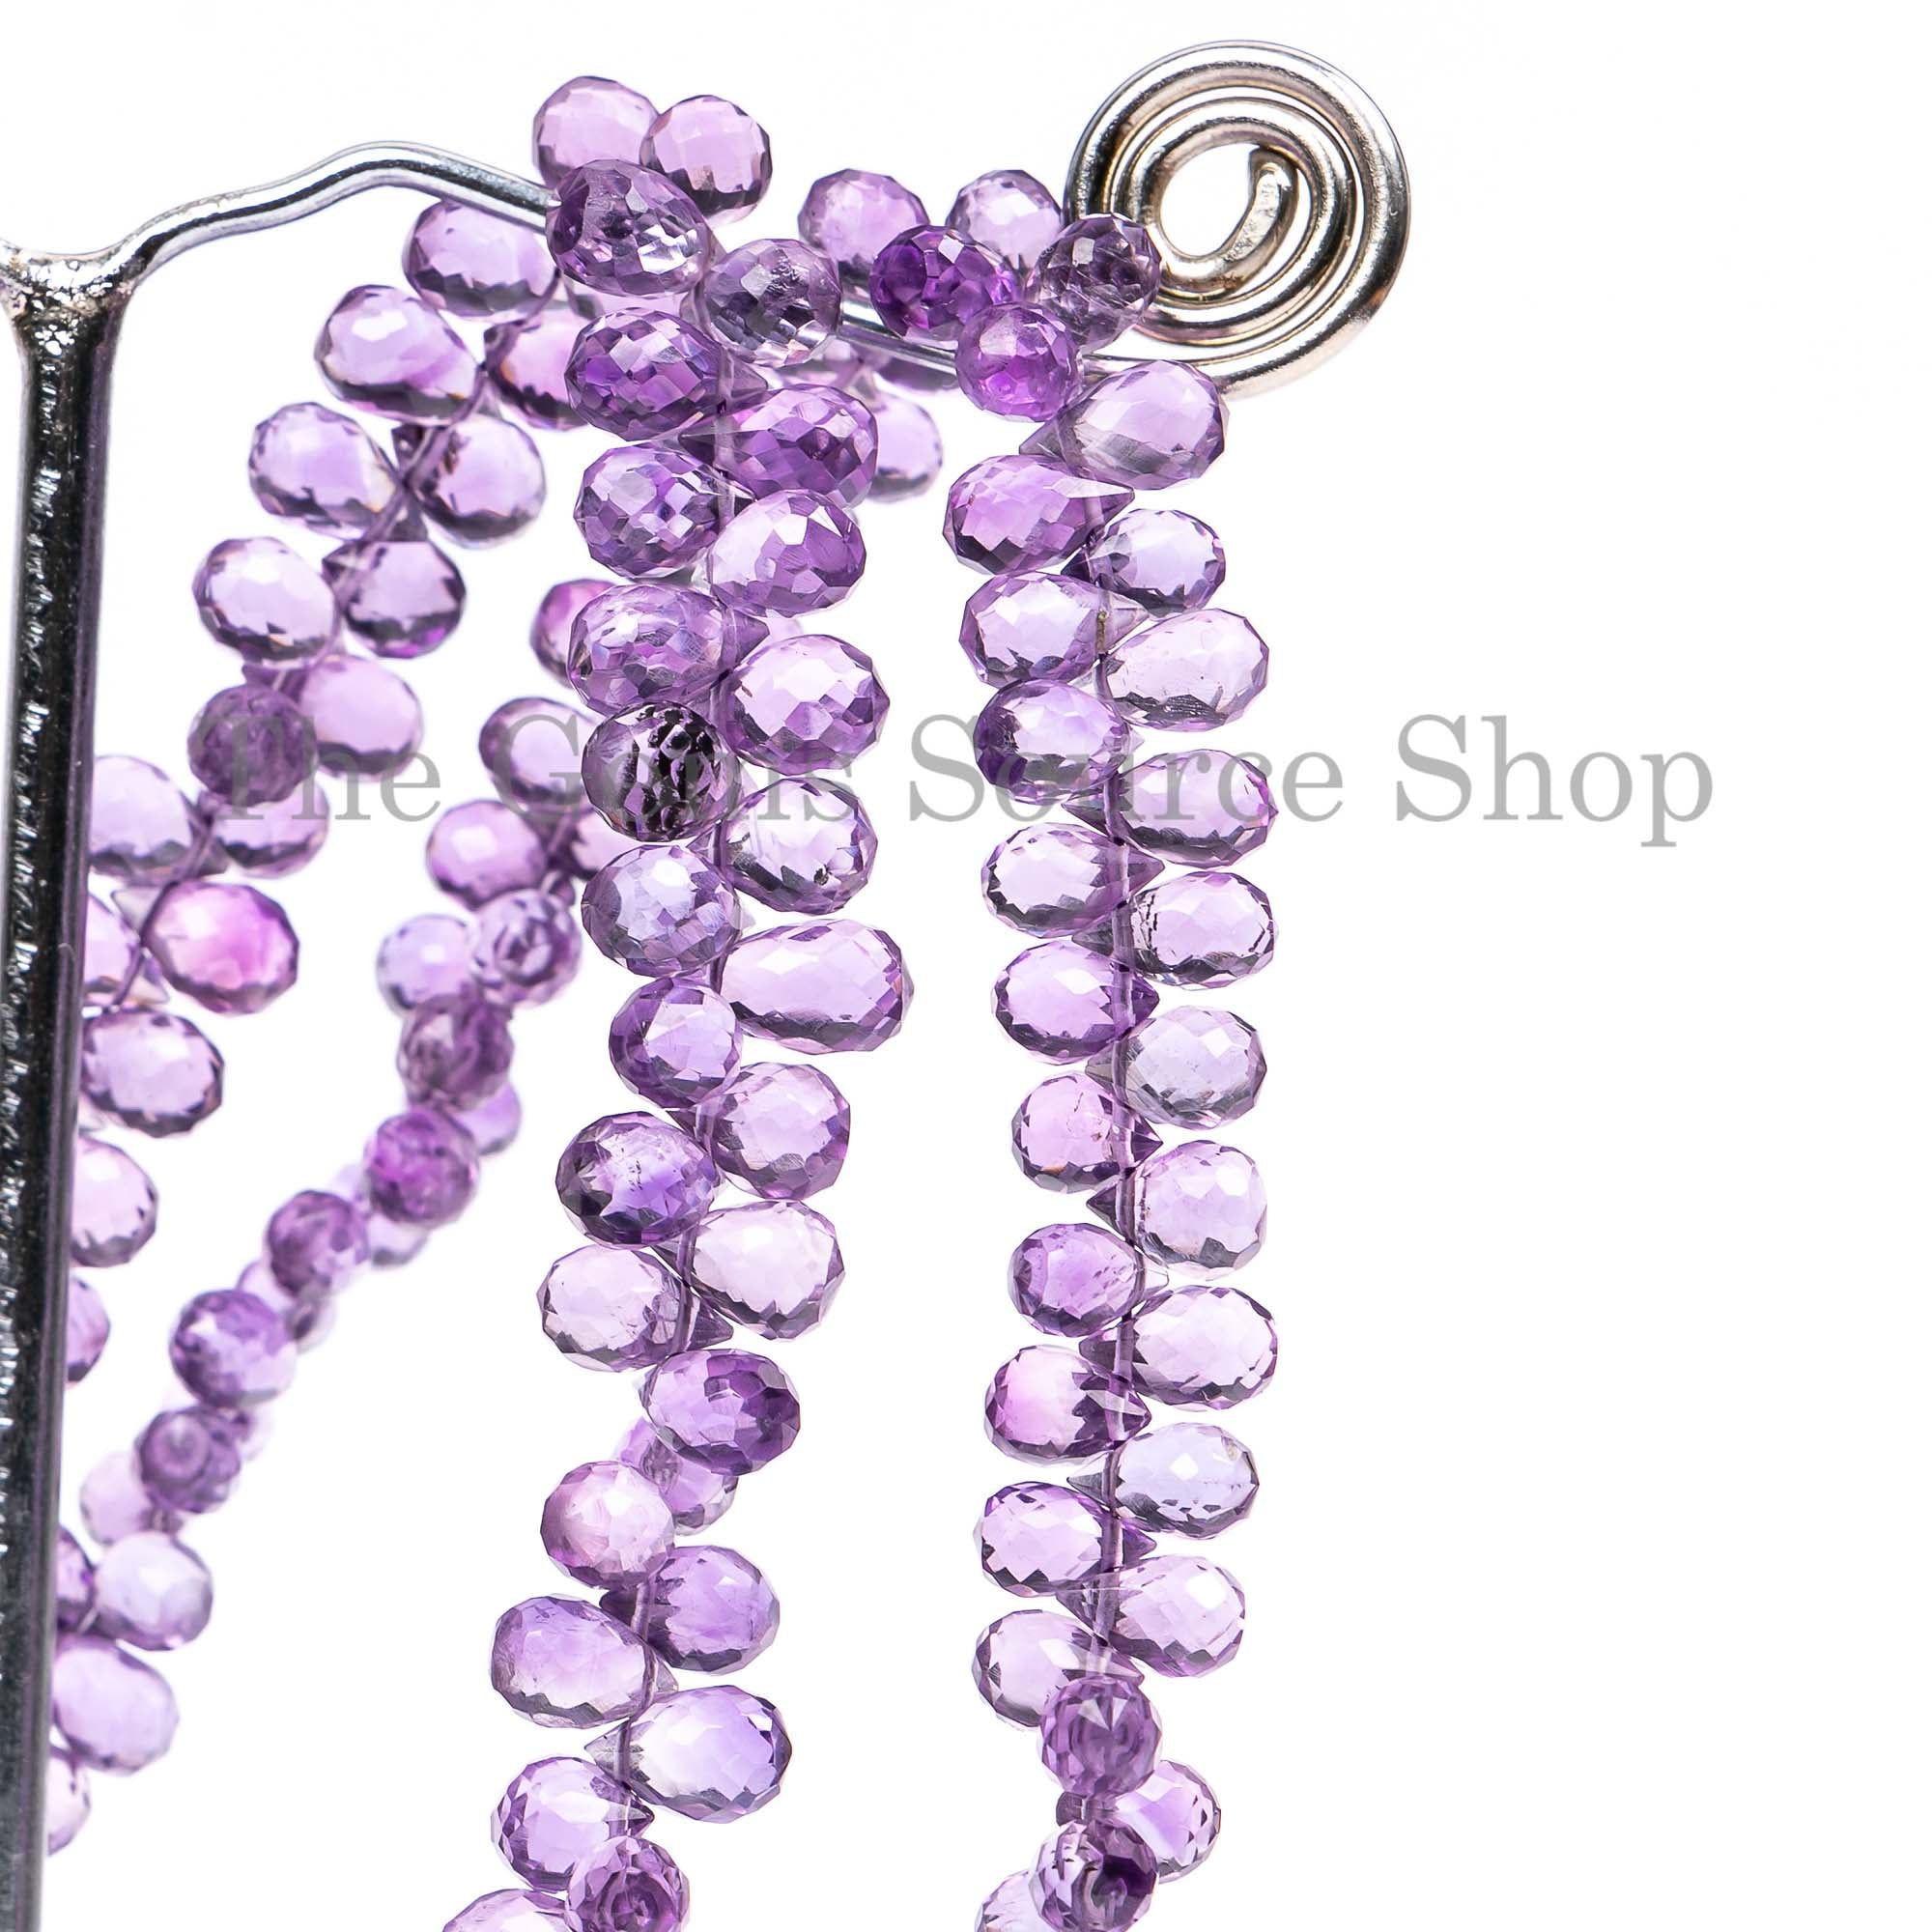 Natural Amethyst Beads, Amethyst Faceted Beads, Amethyst Drop Shape Beads, Wholesale Beads